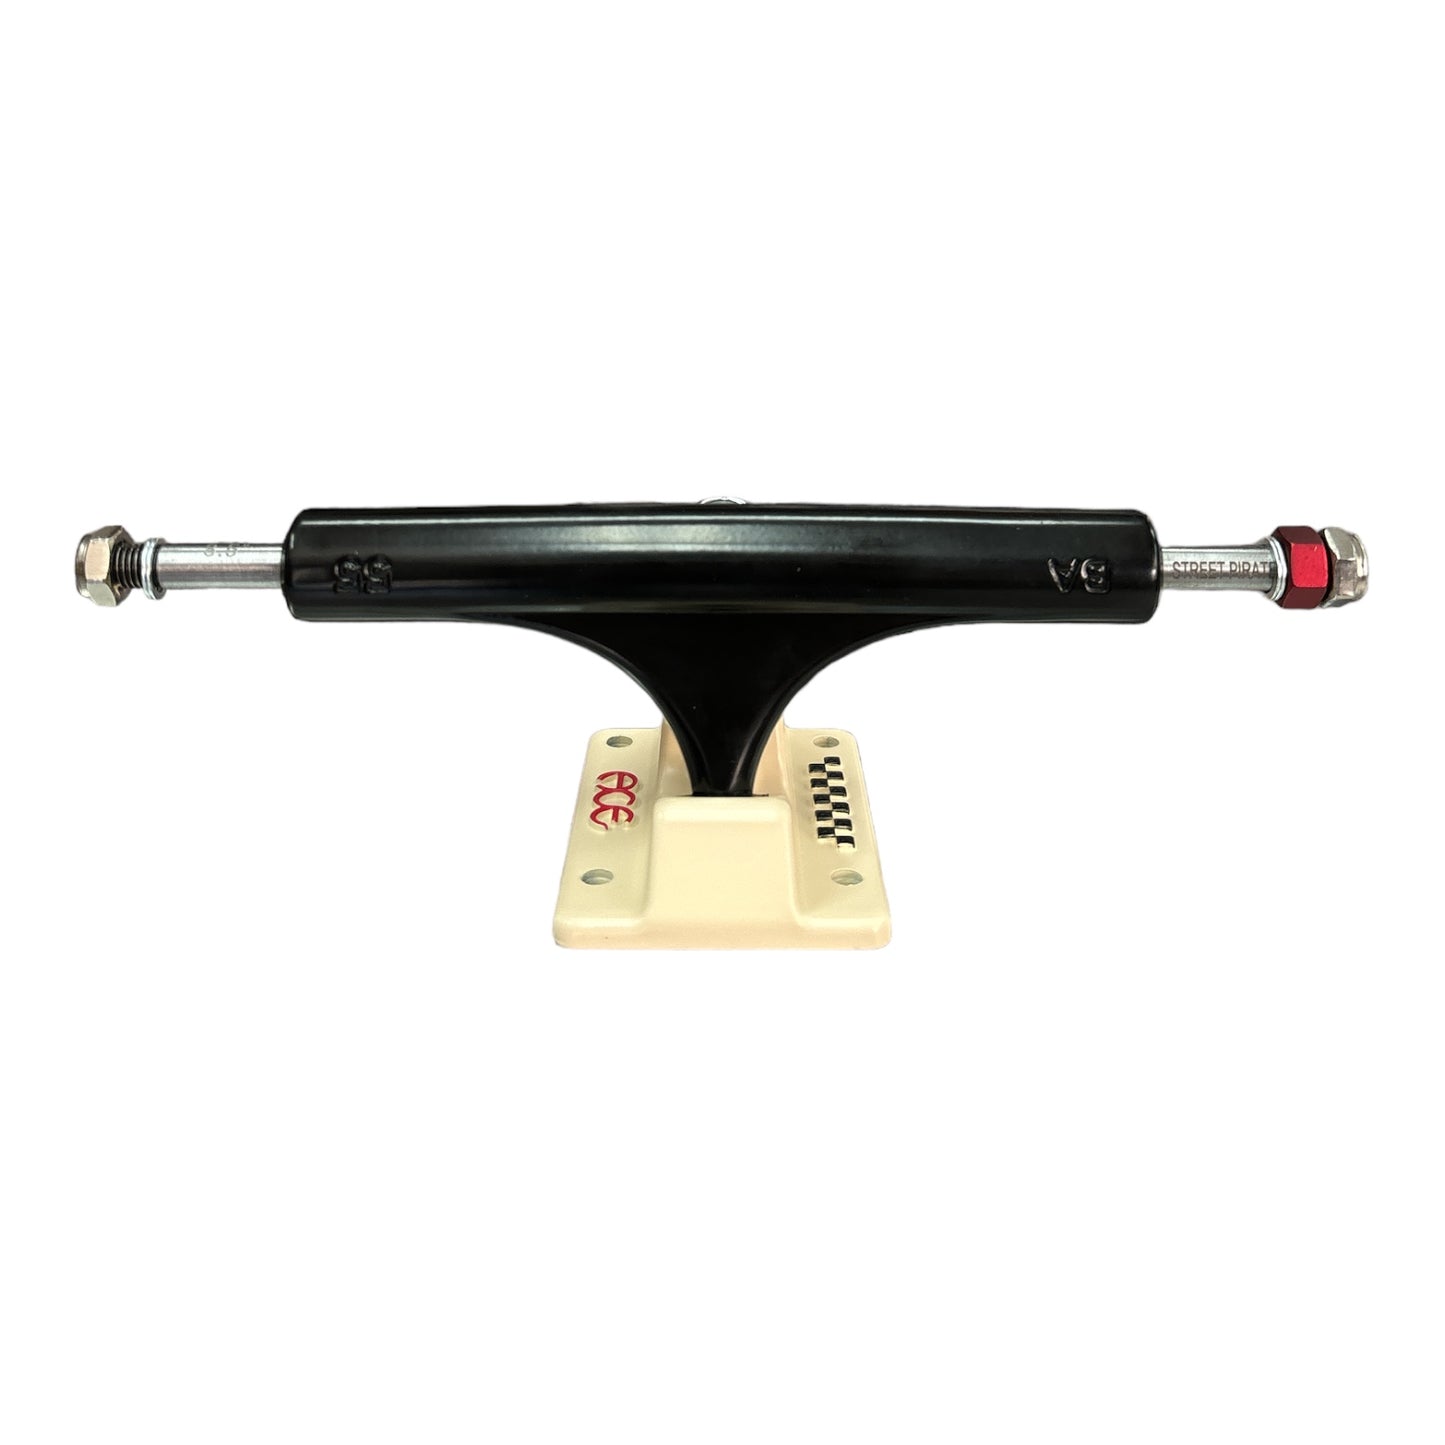 Skateboard Truck with Black Hanger with Cream Baseplate.